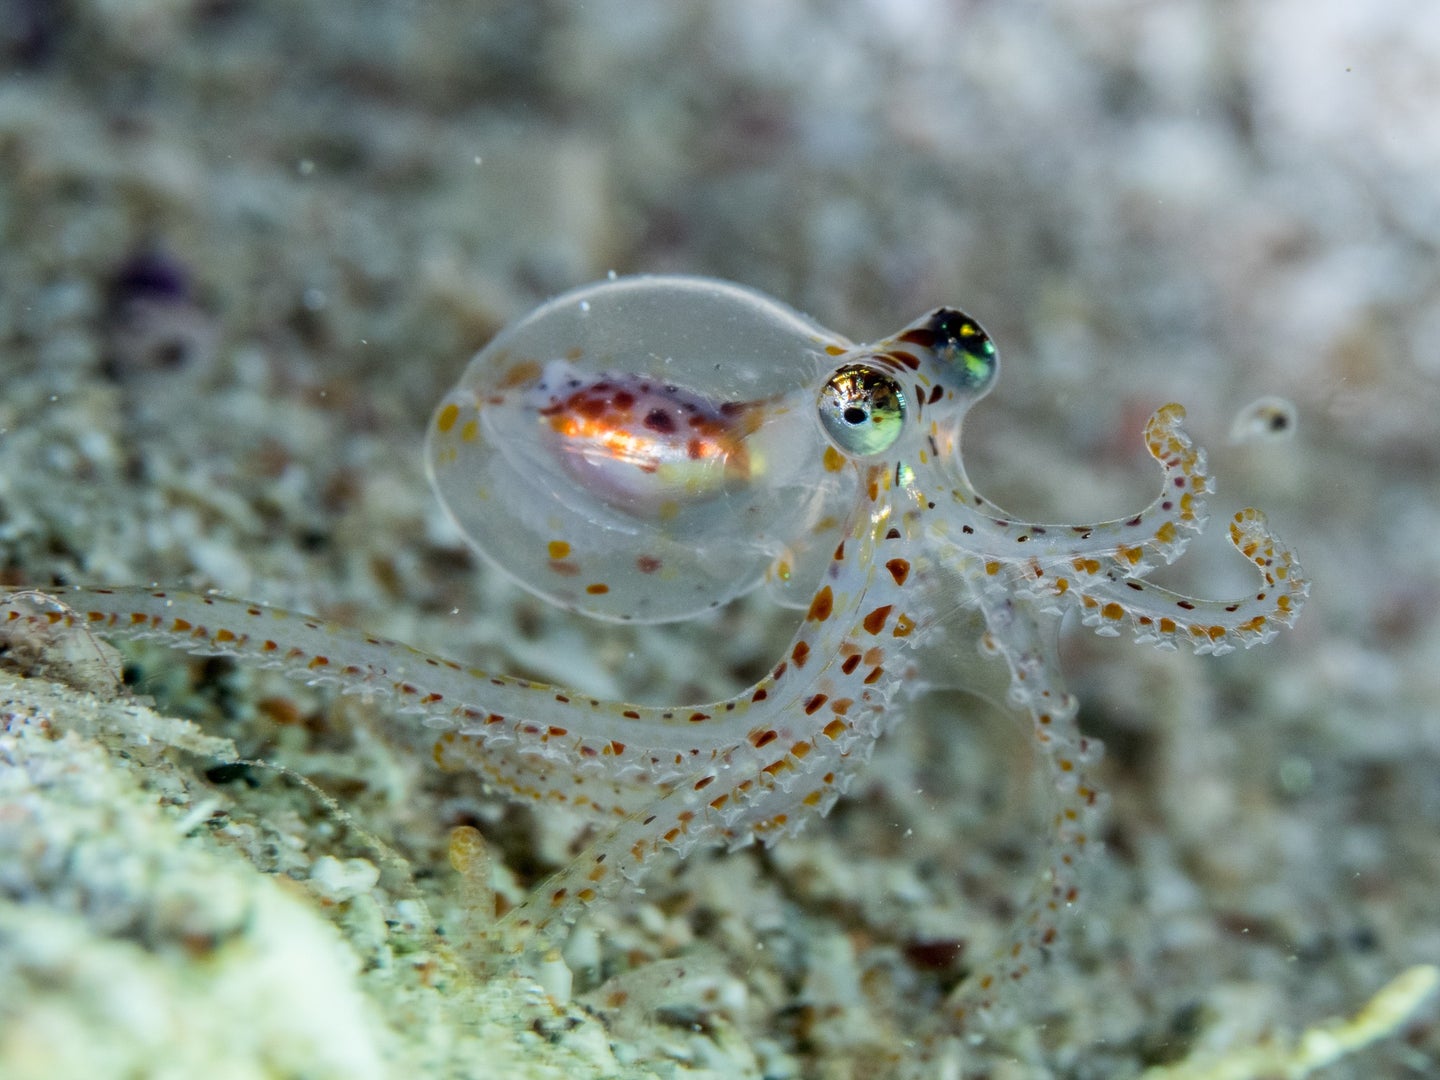 Tiny octopus with clear head that shows off brain